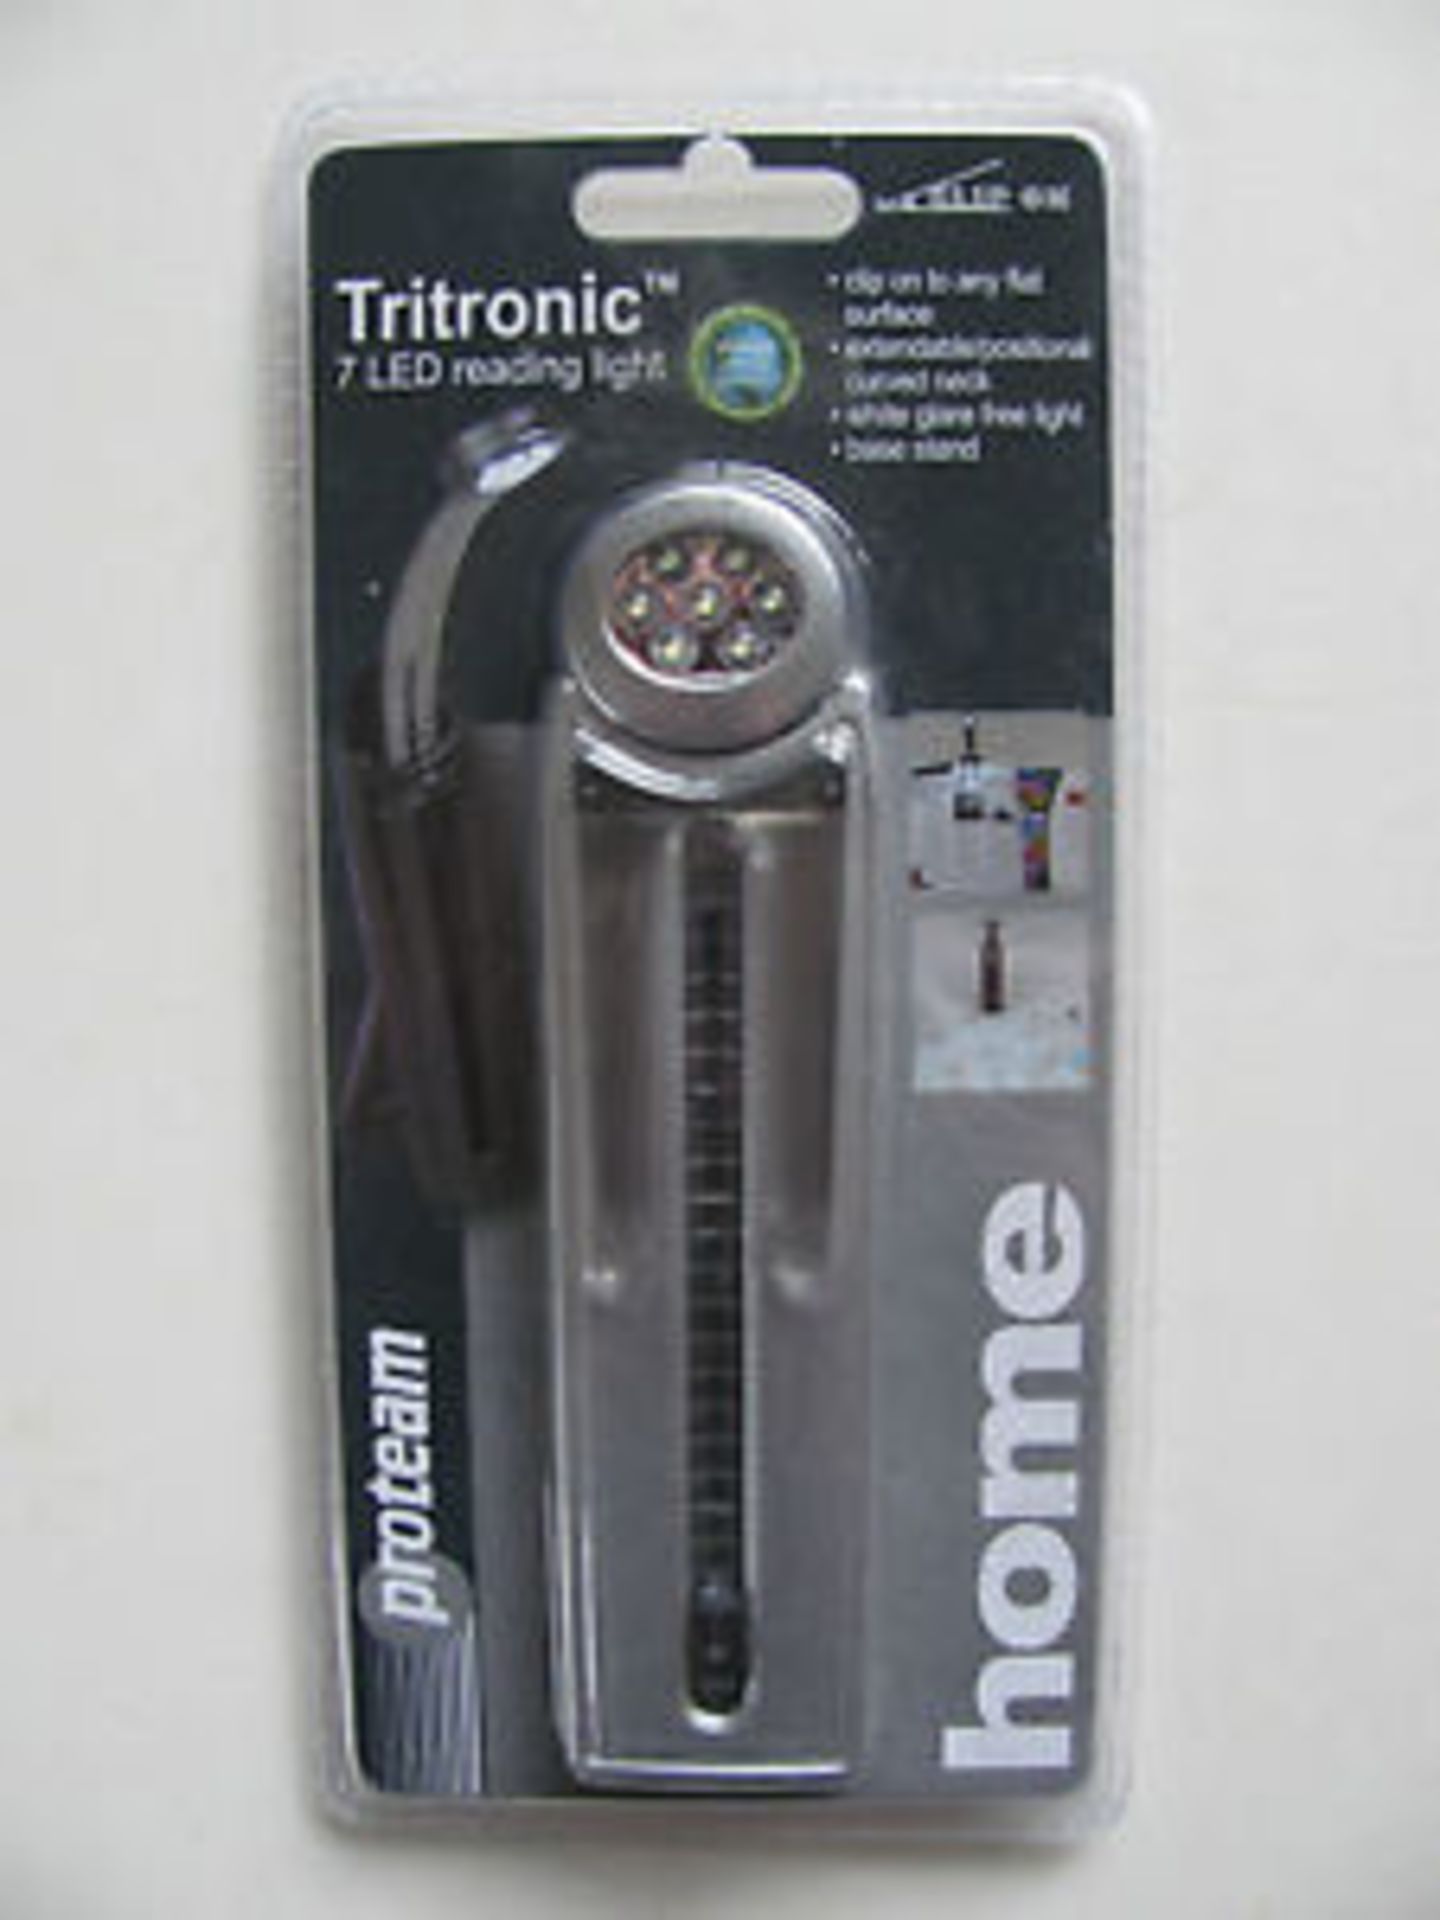 V Brand New Tritronic 7 LED Reading Light With Clip & Stand